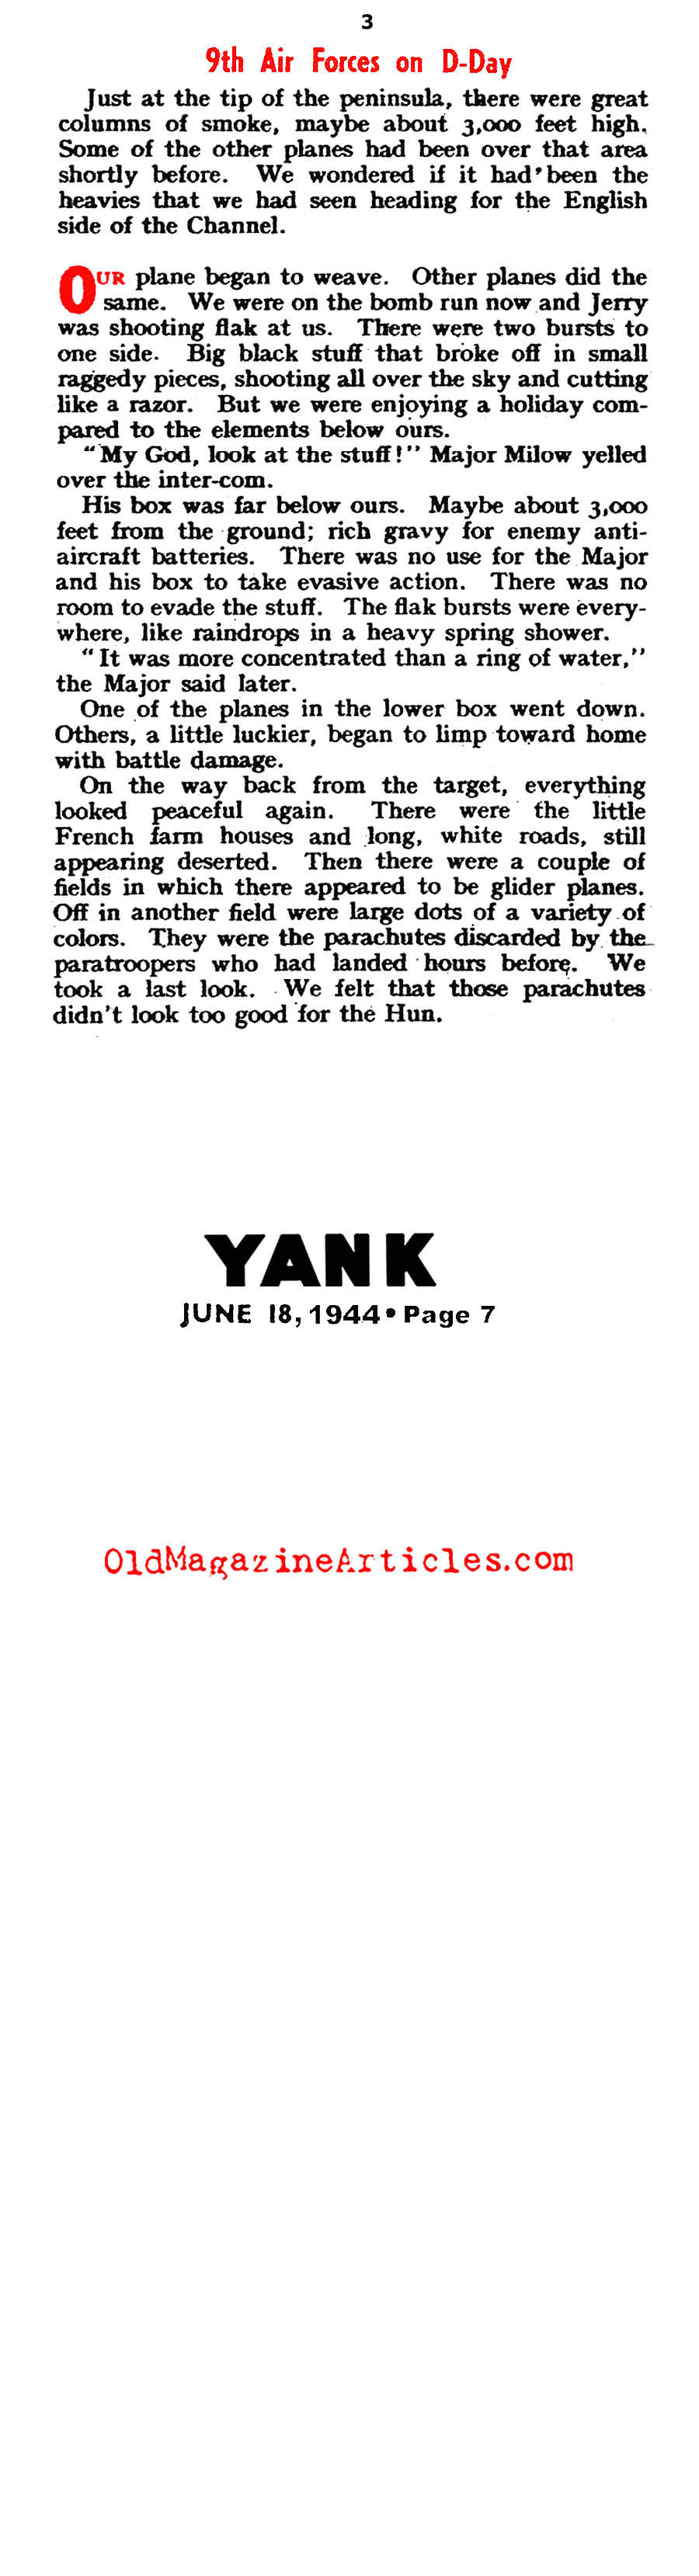 The 9th Air Force on D-Day (Yank Magazine, 1944)